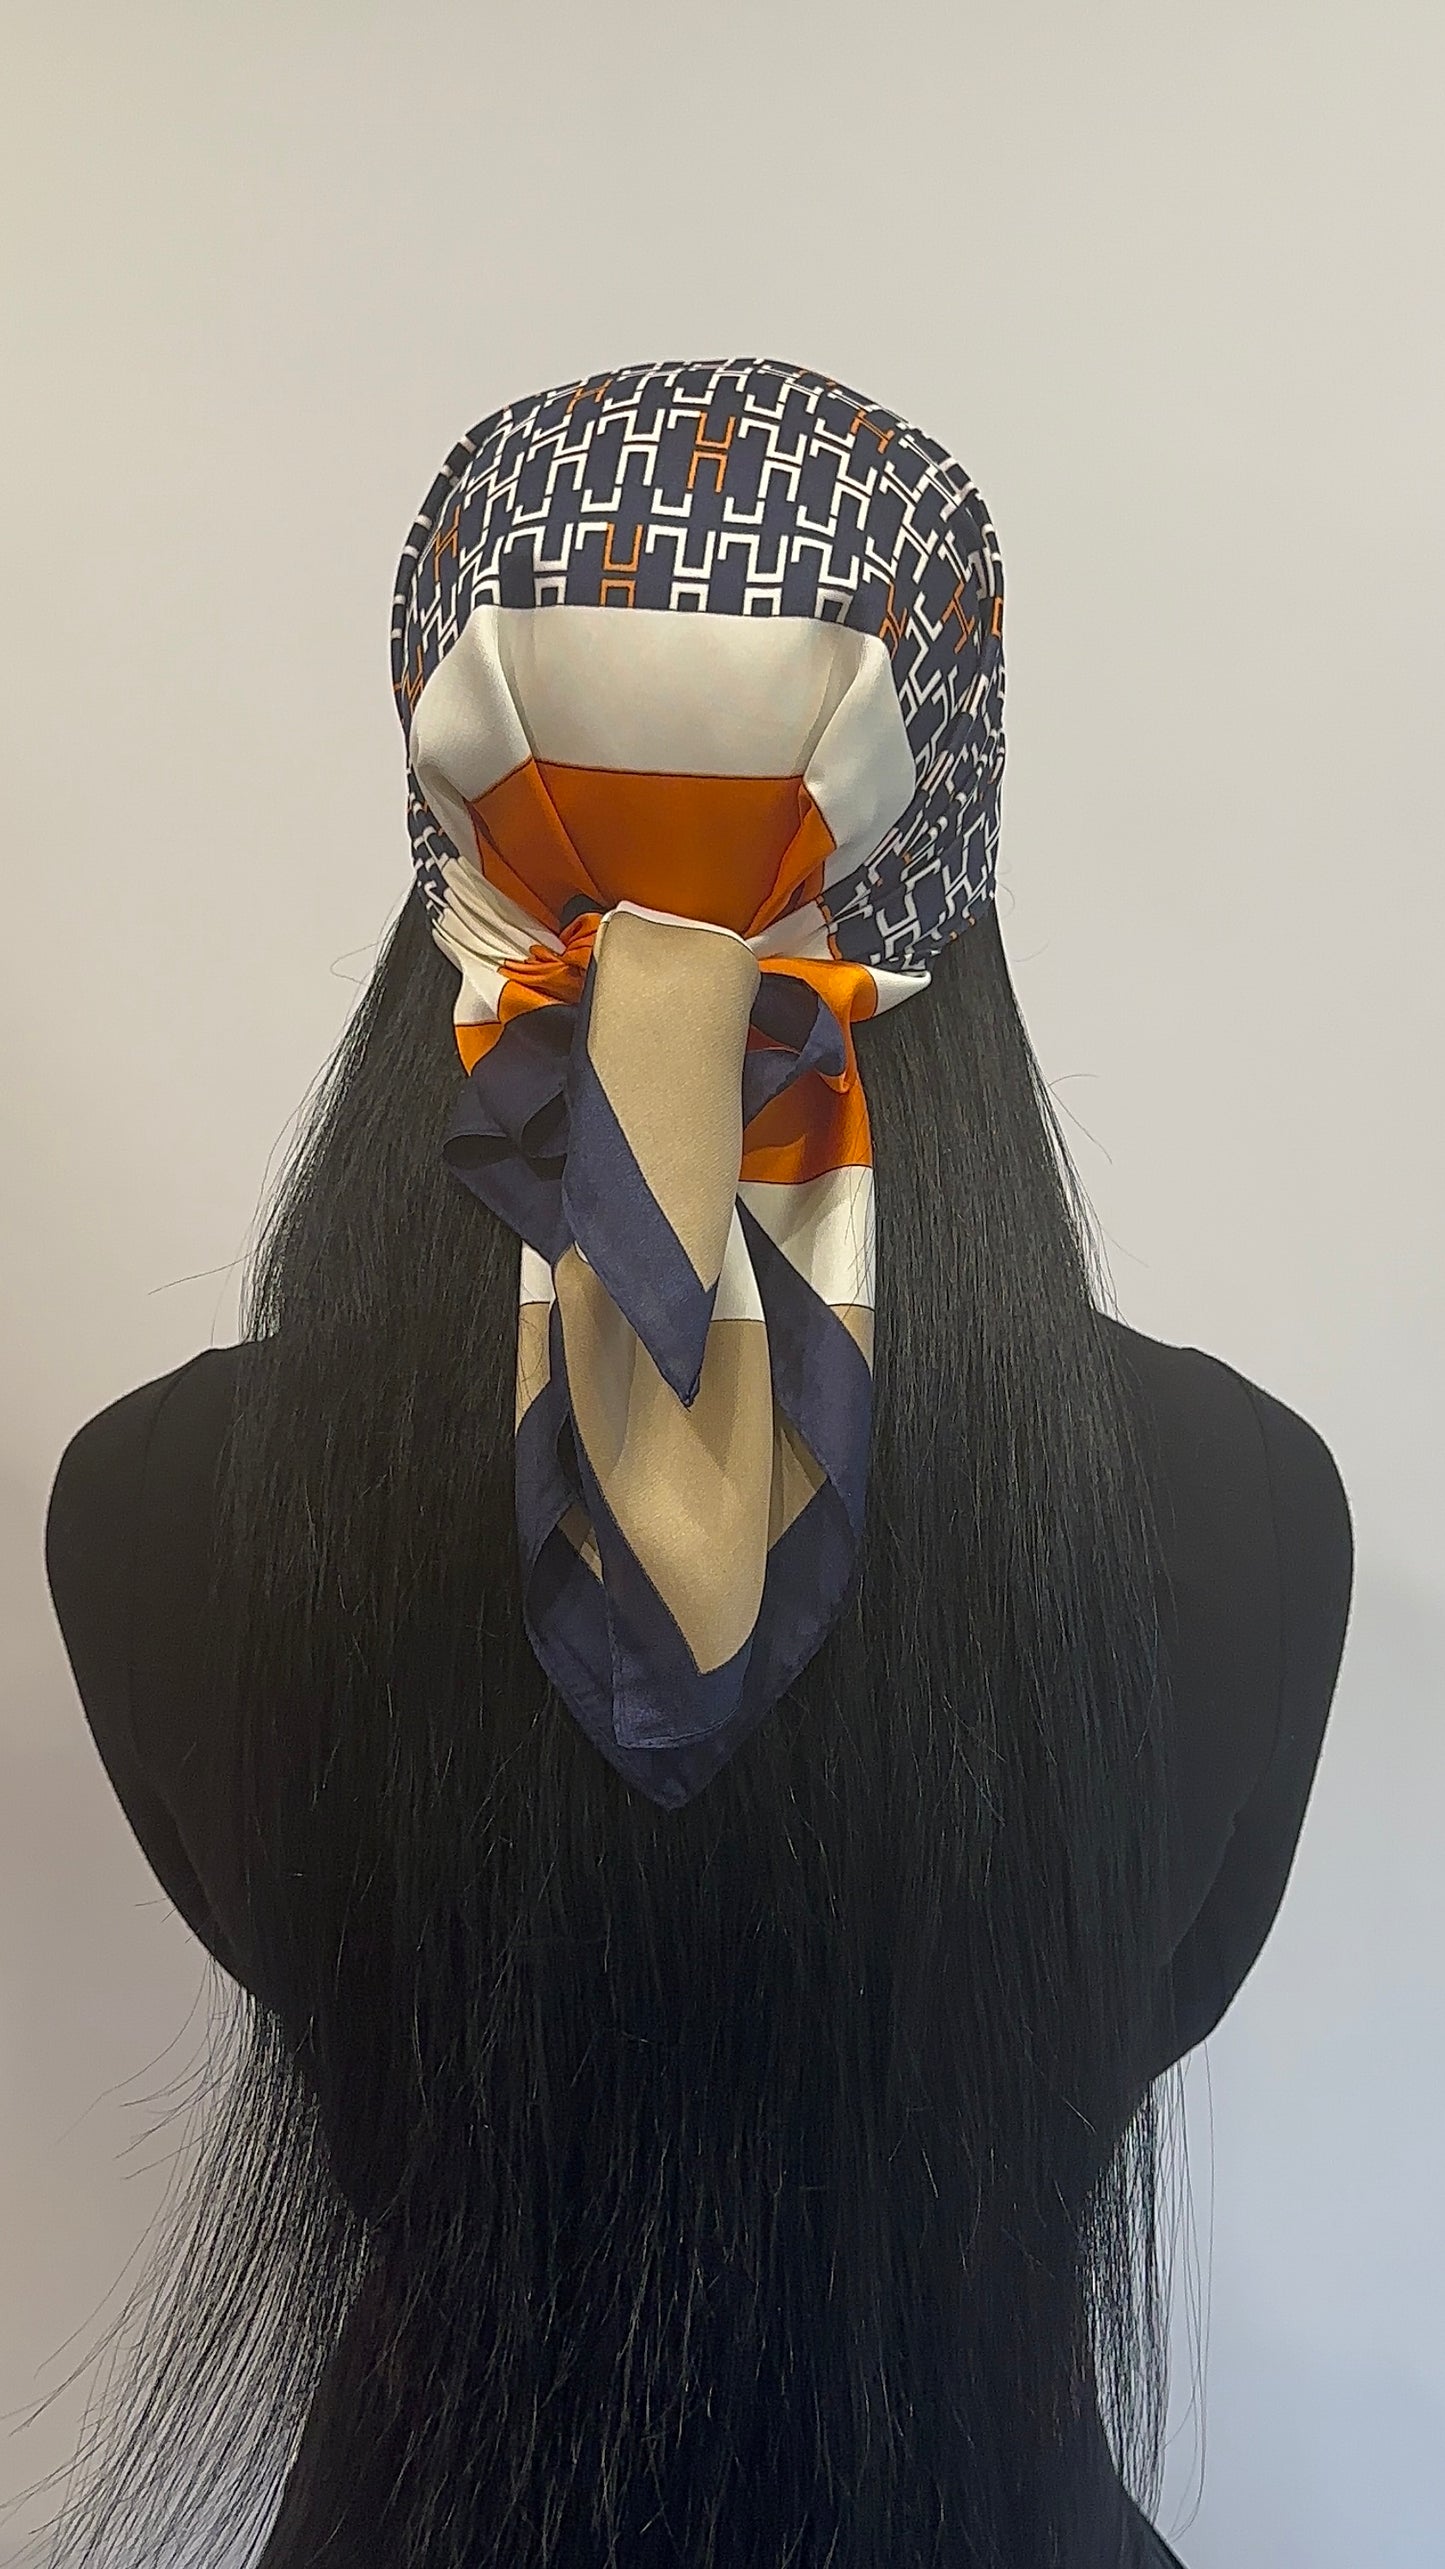 Crowning Glory Hair Wrap Scarves.